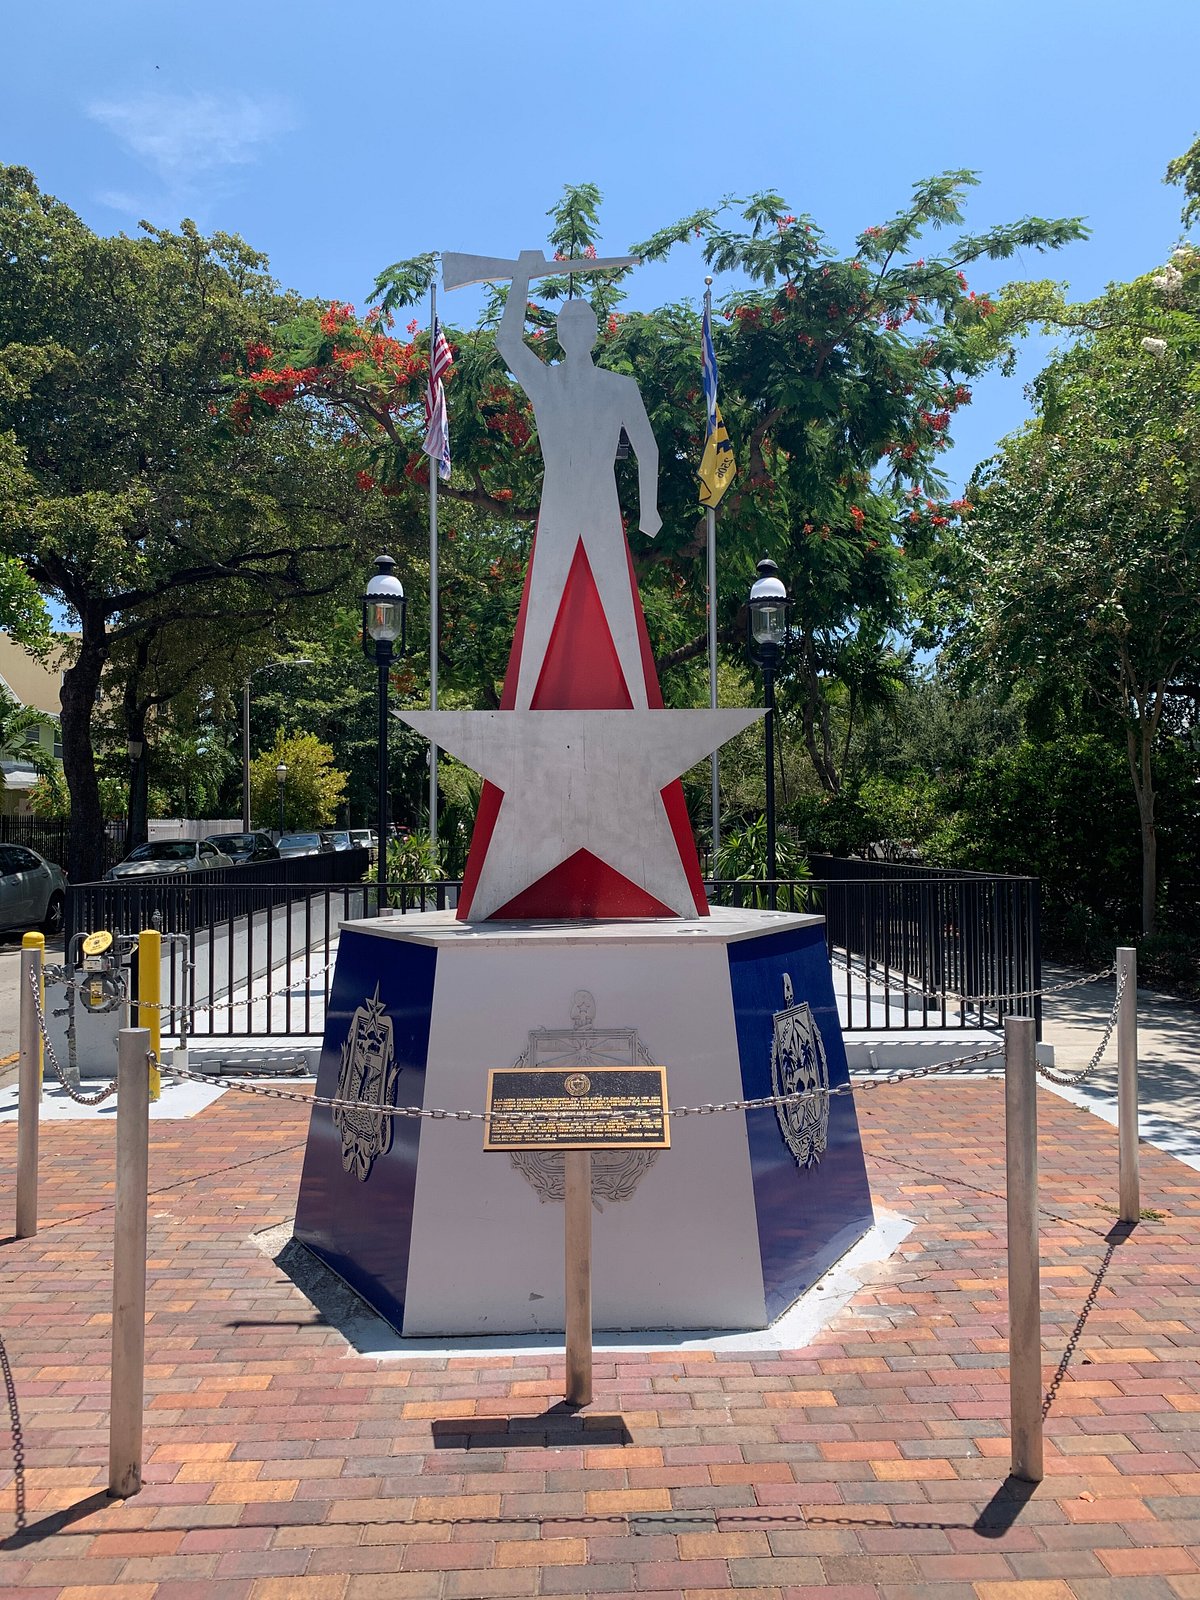 Bay Of Pigs Monument Tour